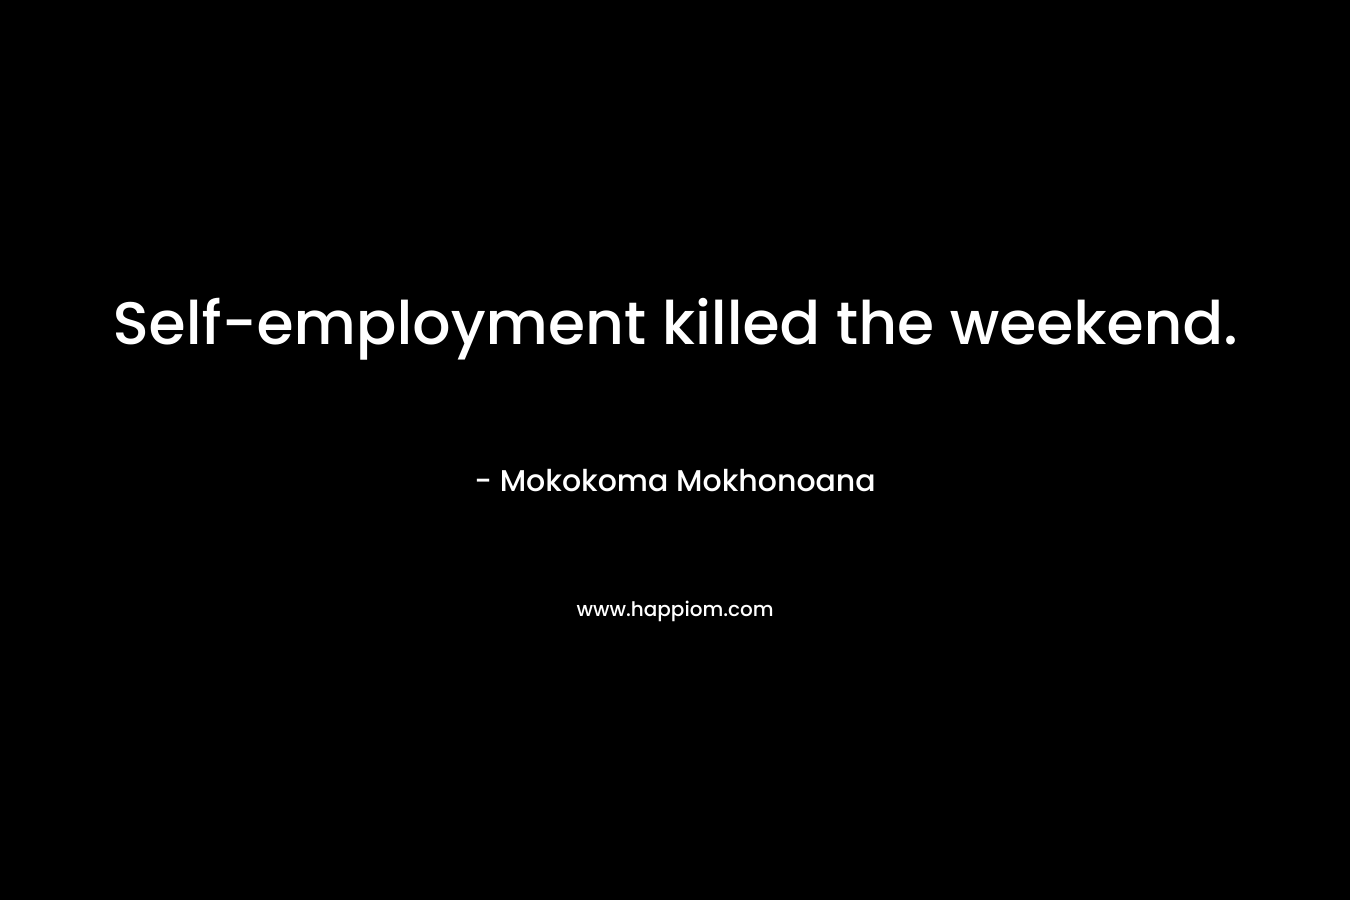 Self-employment killed the weekend.